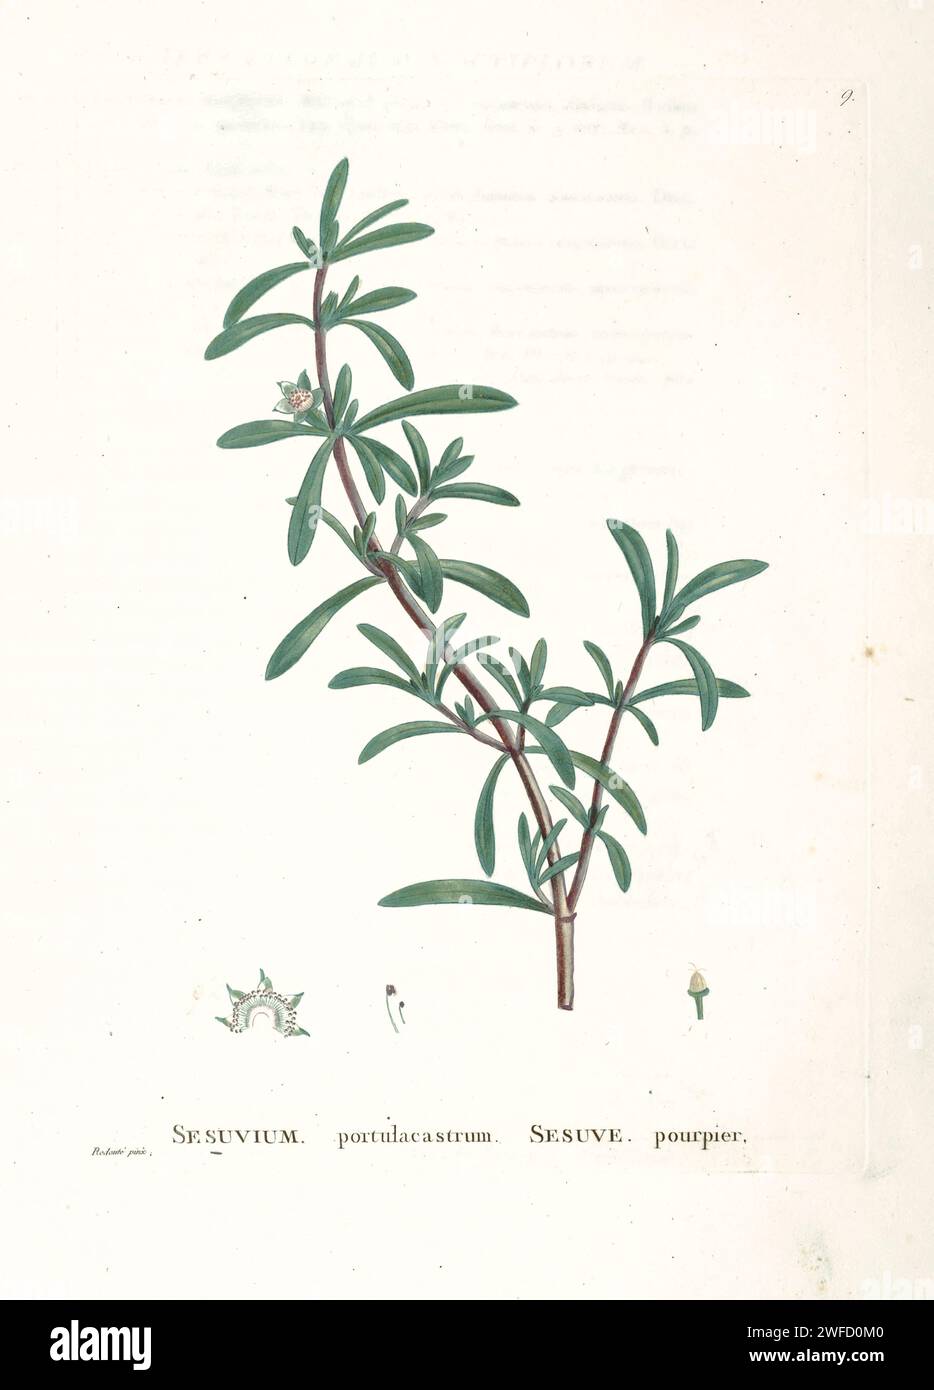 Sesuvium portulacastrum L. from History of Succulent Plants [Plantarum historia succulentarum / Histoire des plantes grasses] painted by Pierre-Joseph Redouté and described by Augustin Pyramus de Candolle Sesuvium portulacastrum is a sprawling perennial herb in the family Aizoaceae that grows in coastal and mangrove areas throughout much of the world. It grows in sandy clay, coastal limestone and sandstone, tidal flats and salt marshes, throughout much of the world. Stock Photo